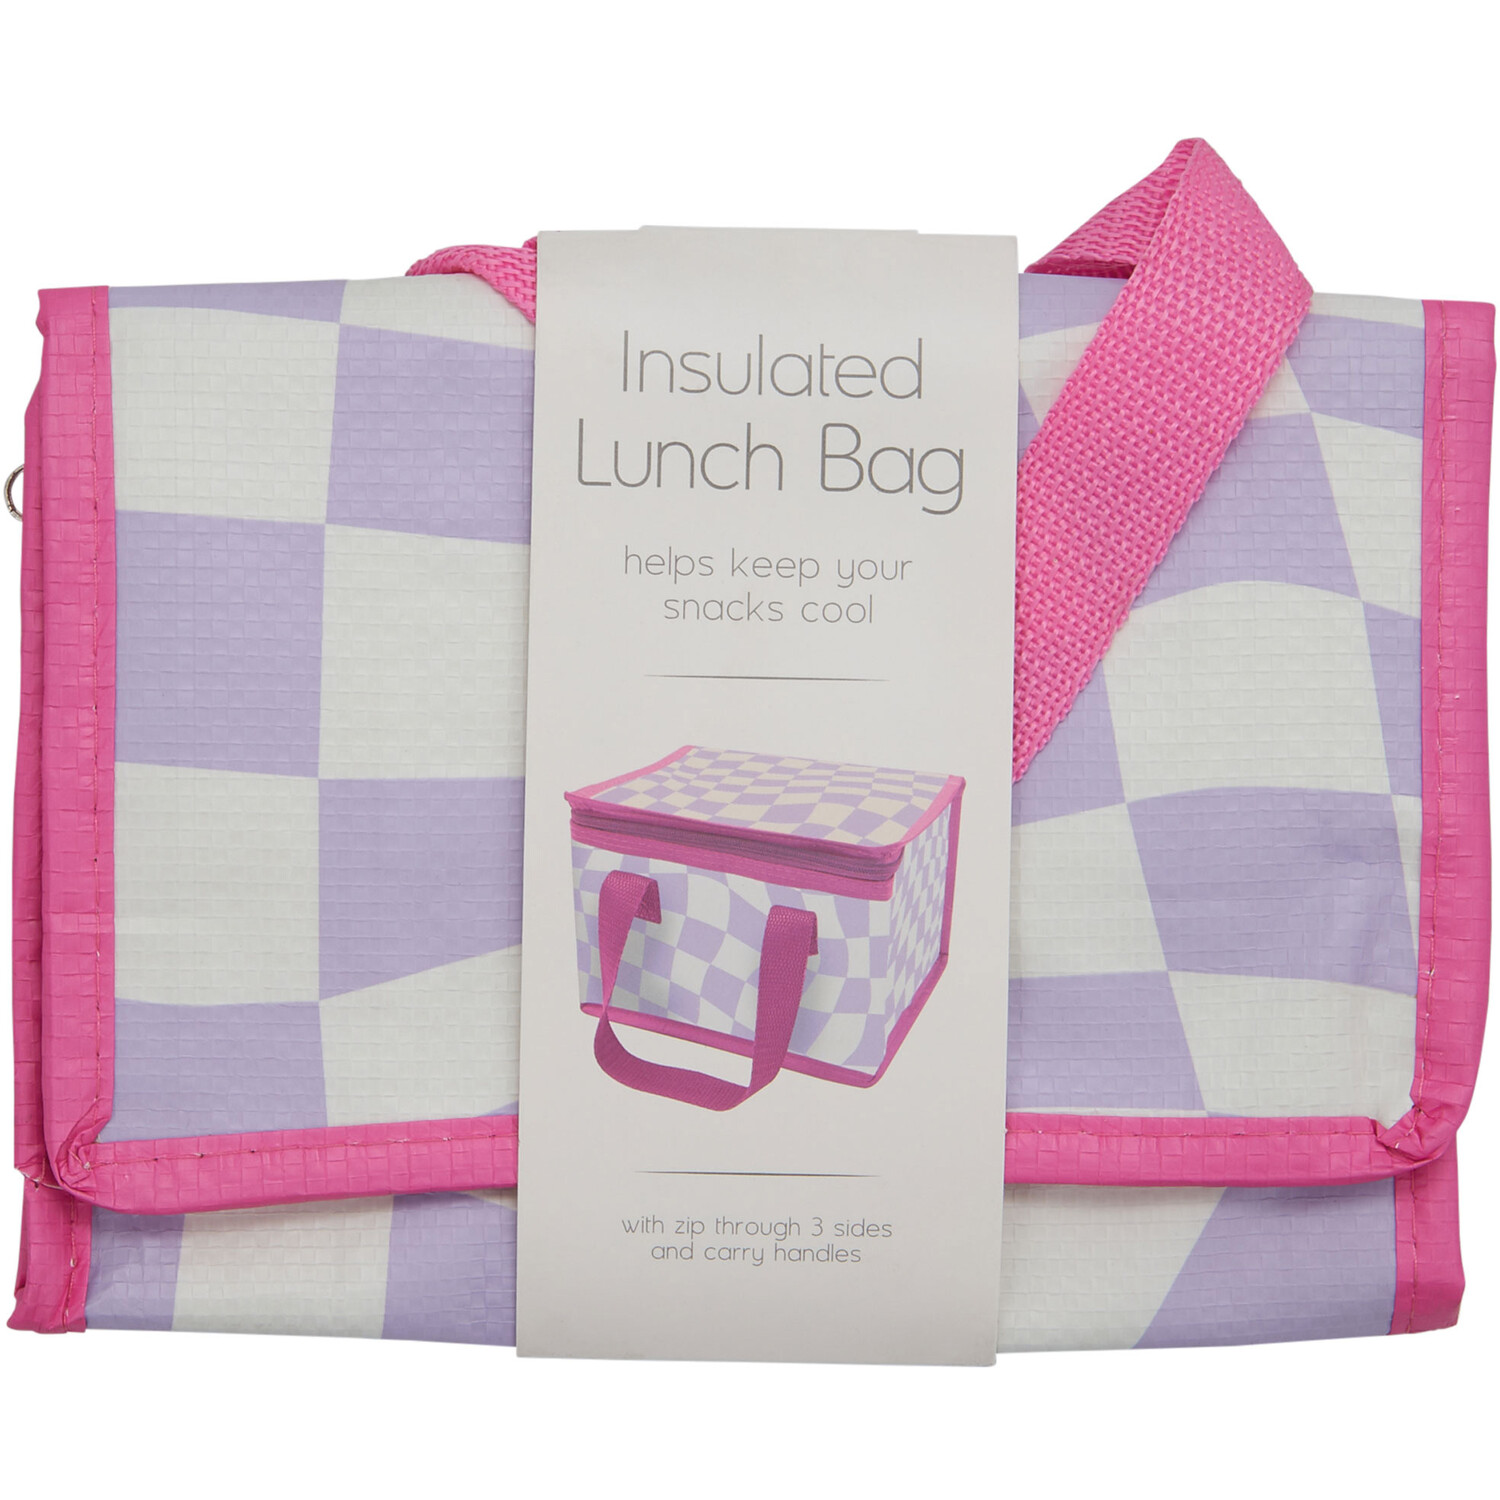 Patterned Insulated Lunch Bags Image 1